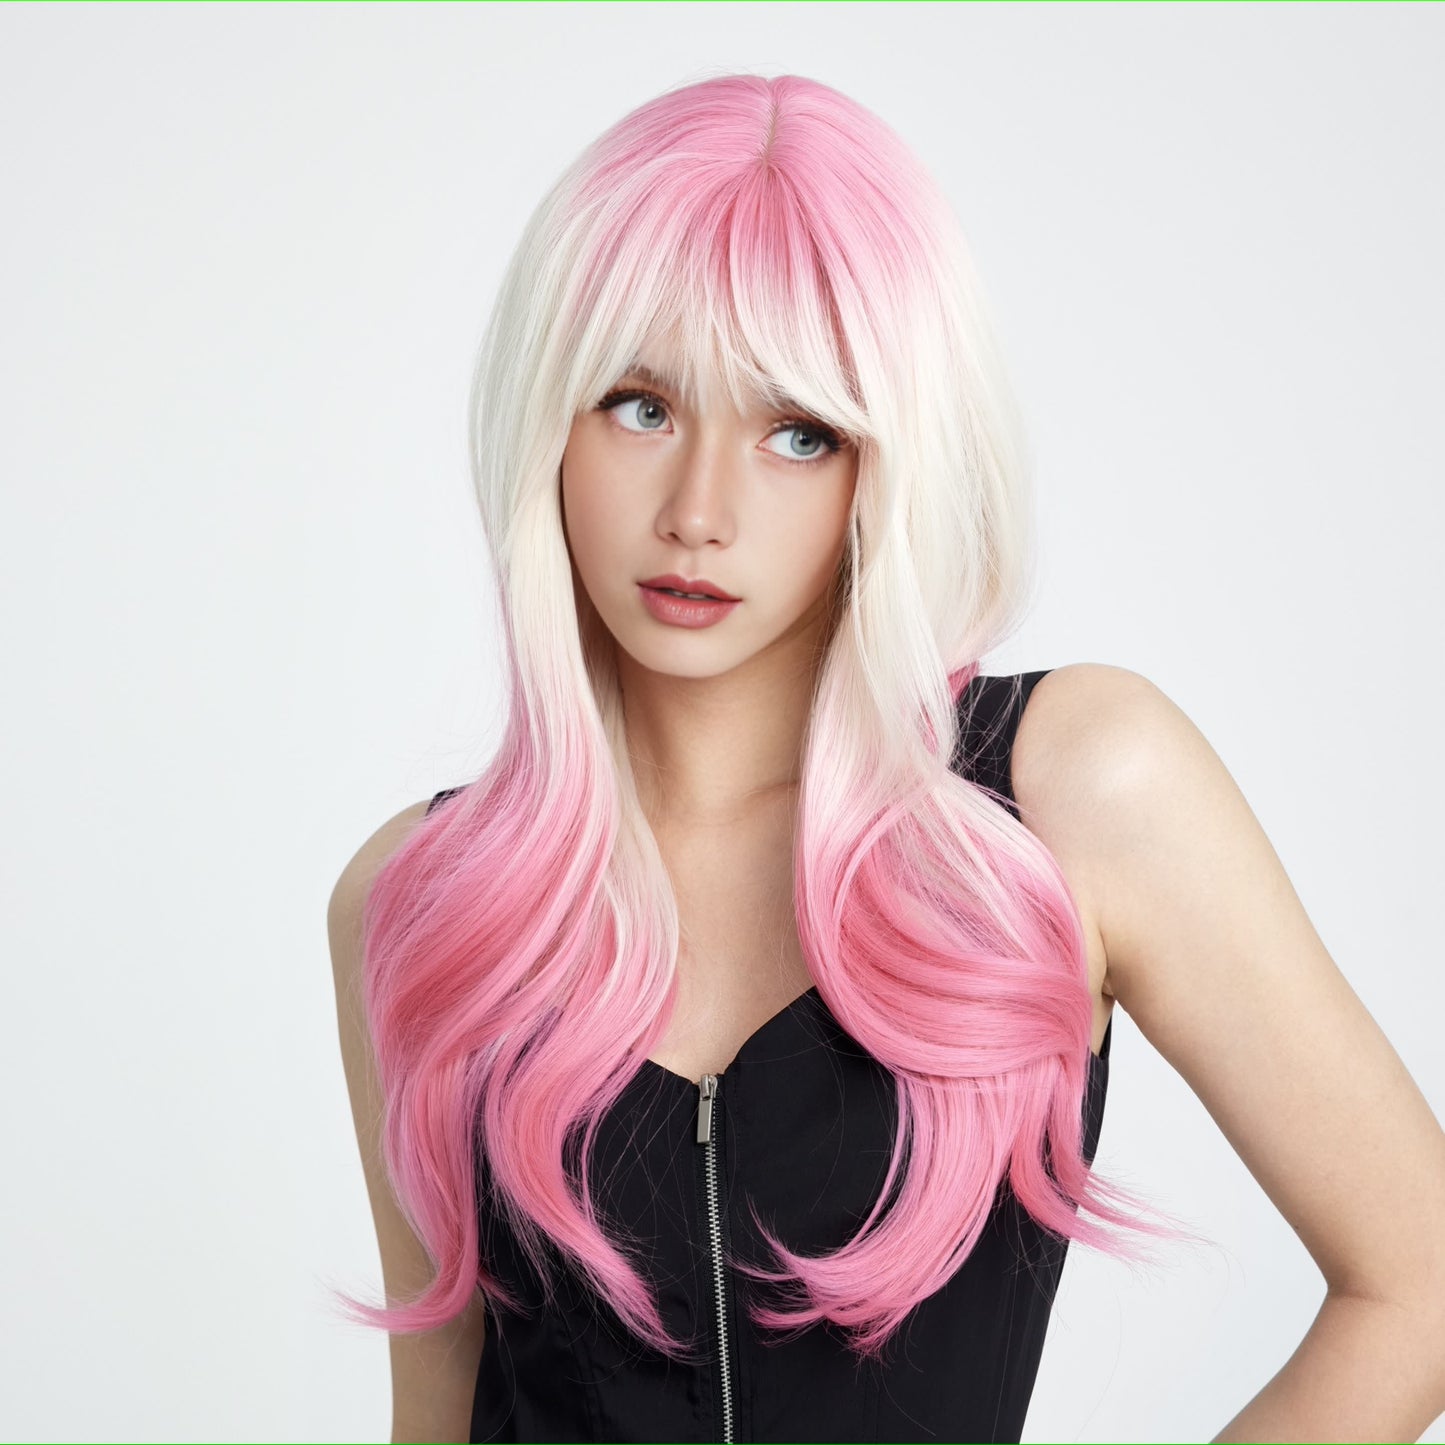 [Candyfloss] 24-inch Ombre Pink White Loose Wave with Bangs (Synthetic Wig)